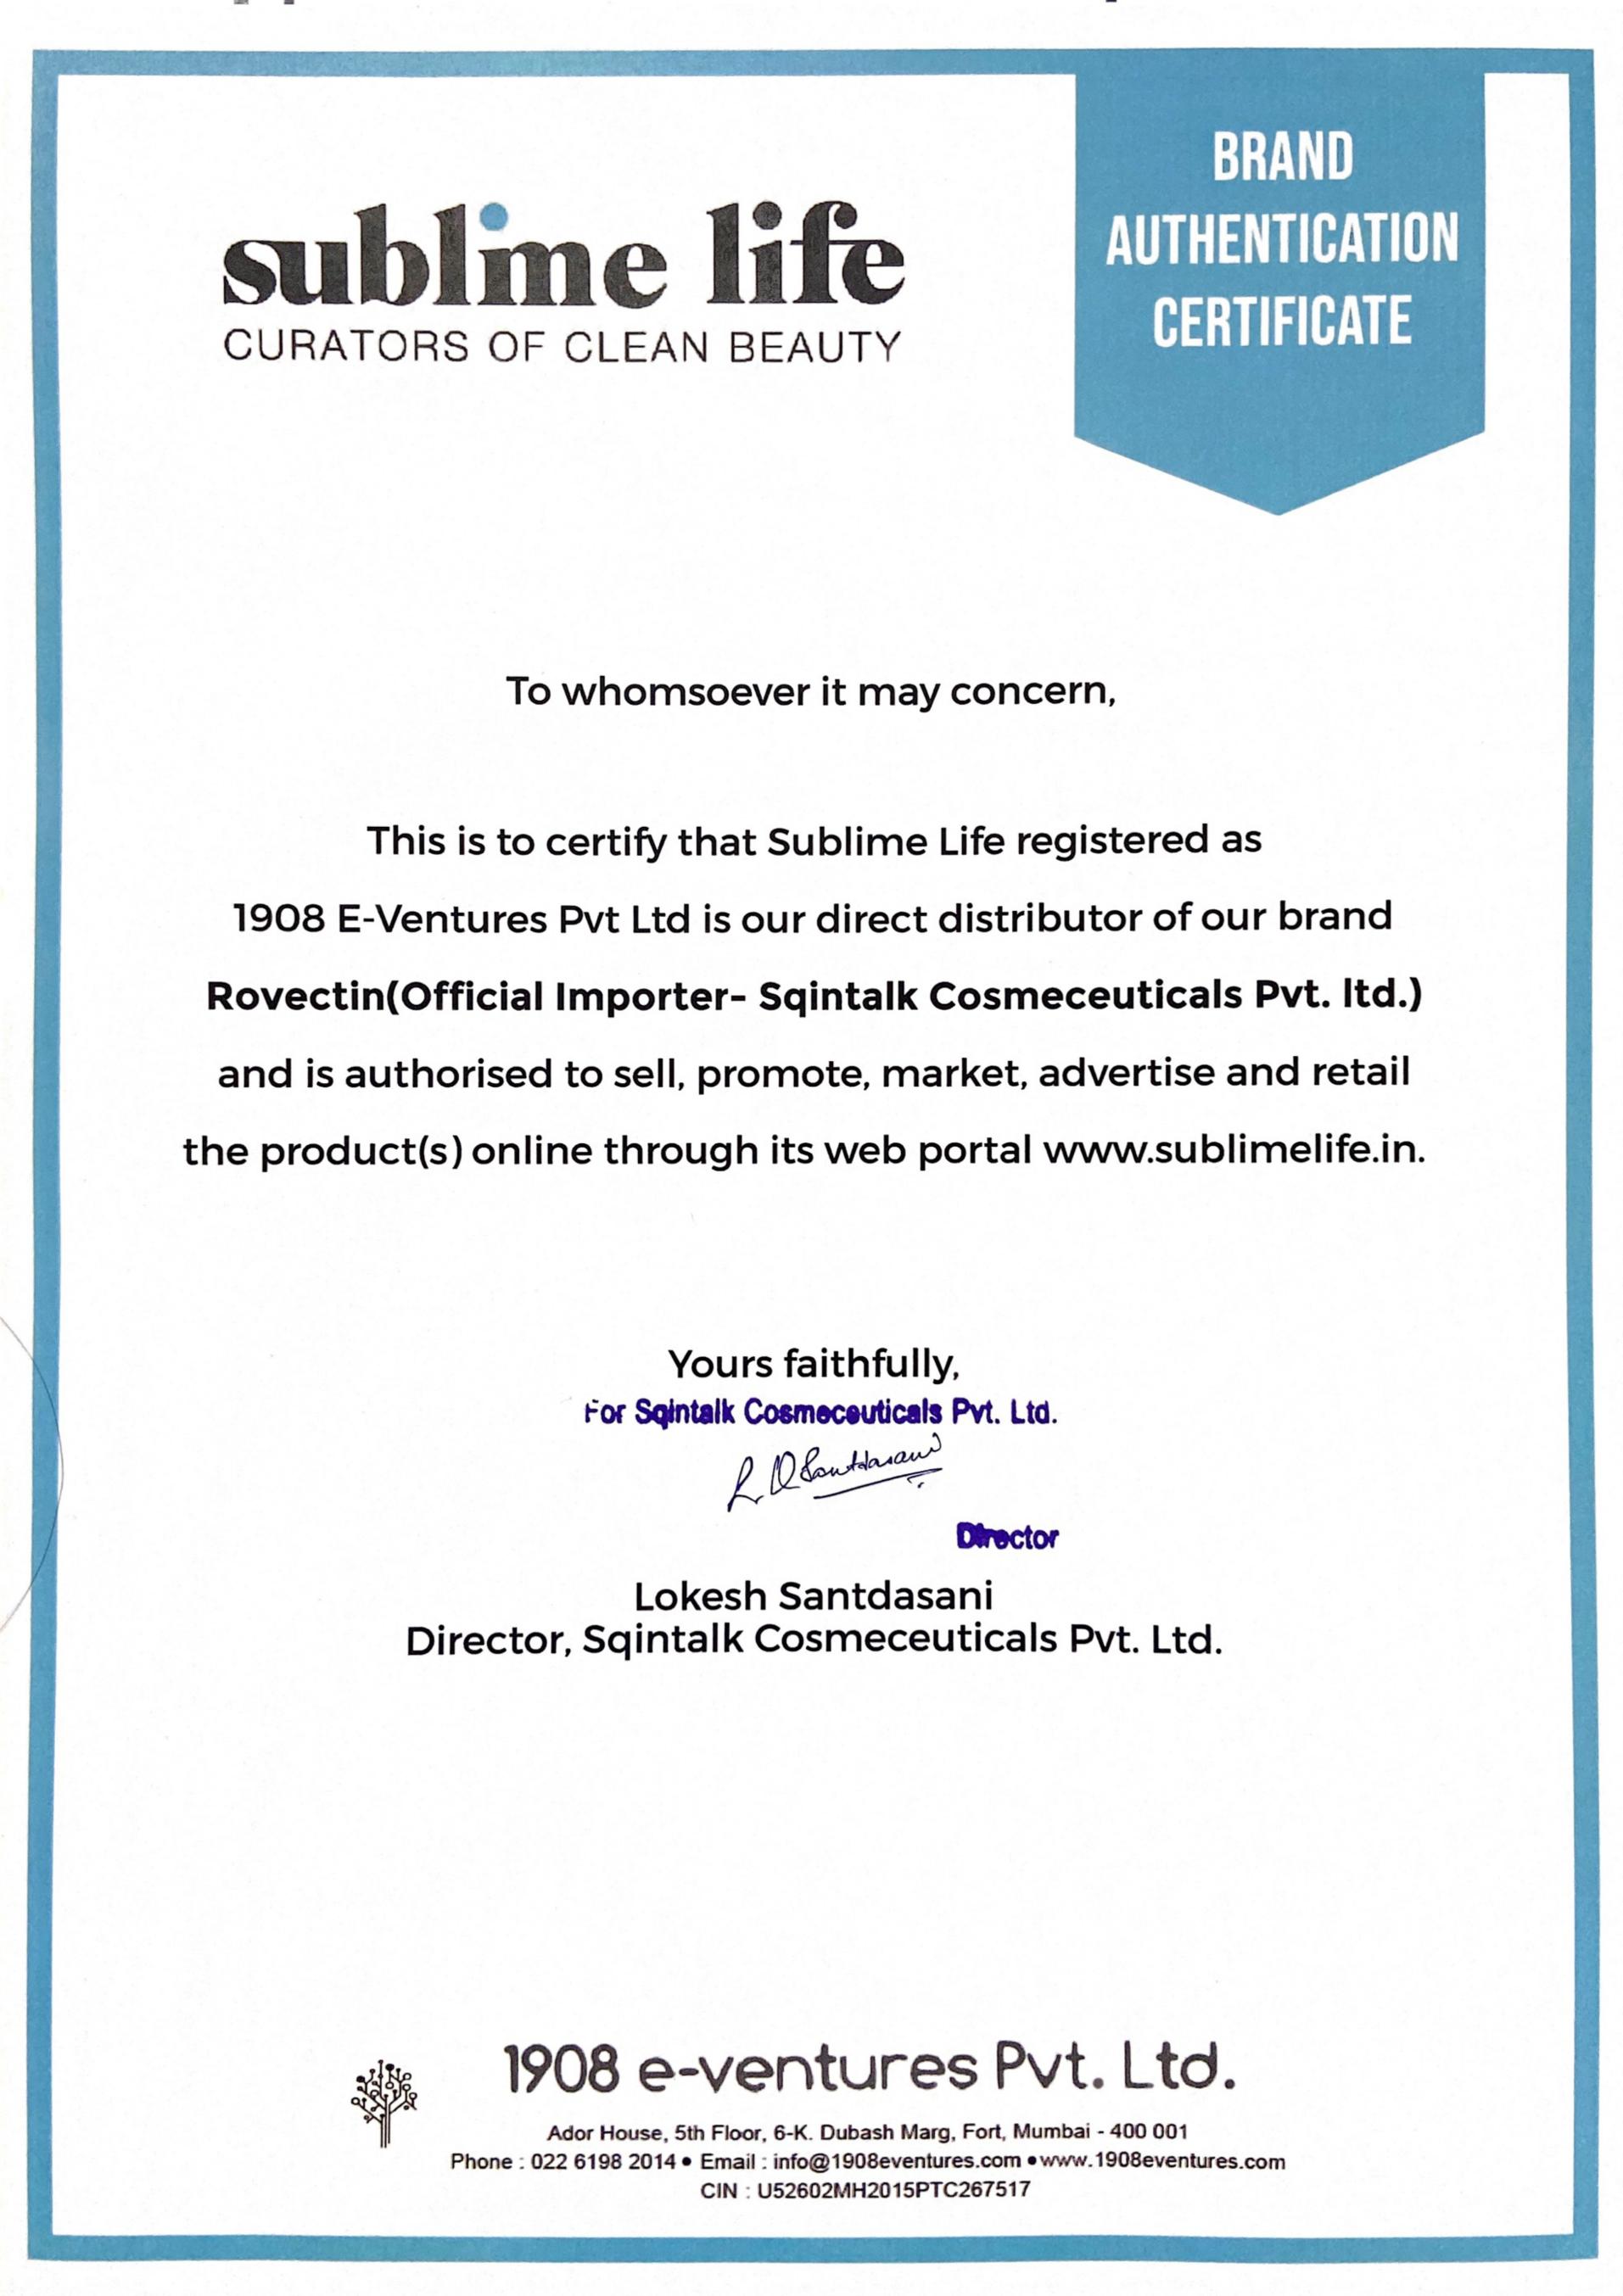 Brand Authentication Certificate- Rovectin